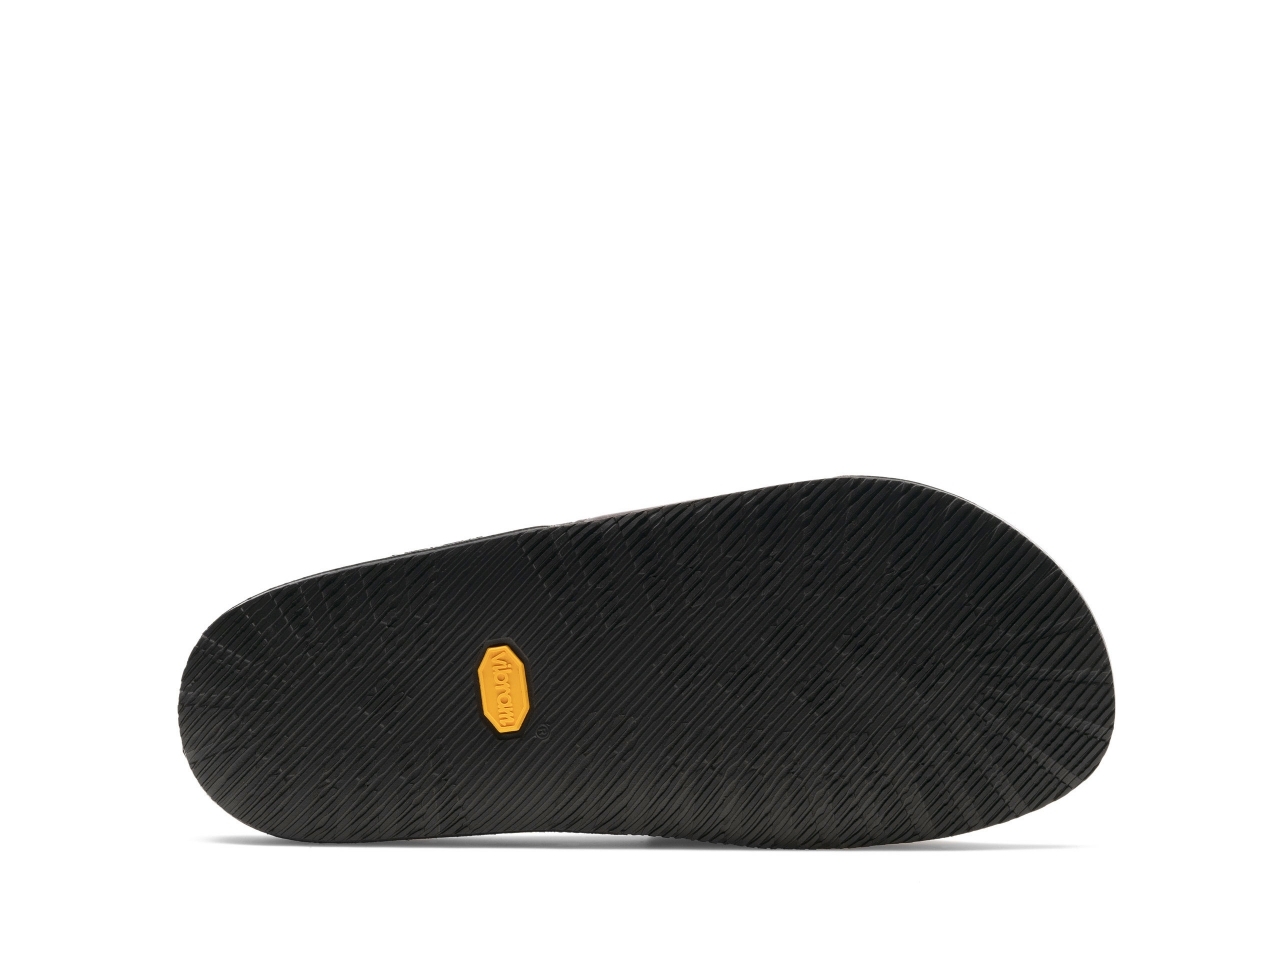 The sole of the Playa Perf